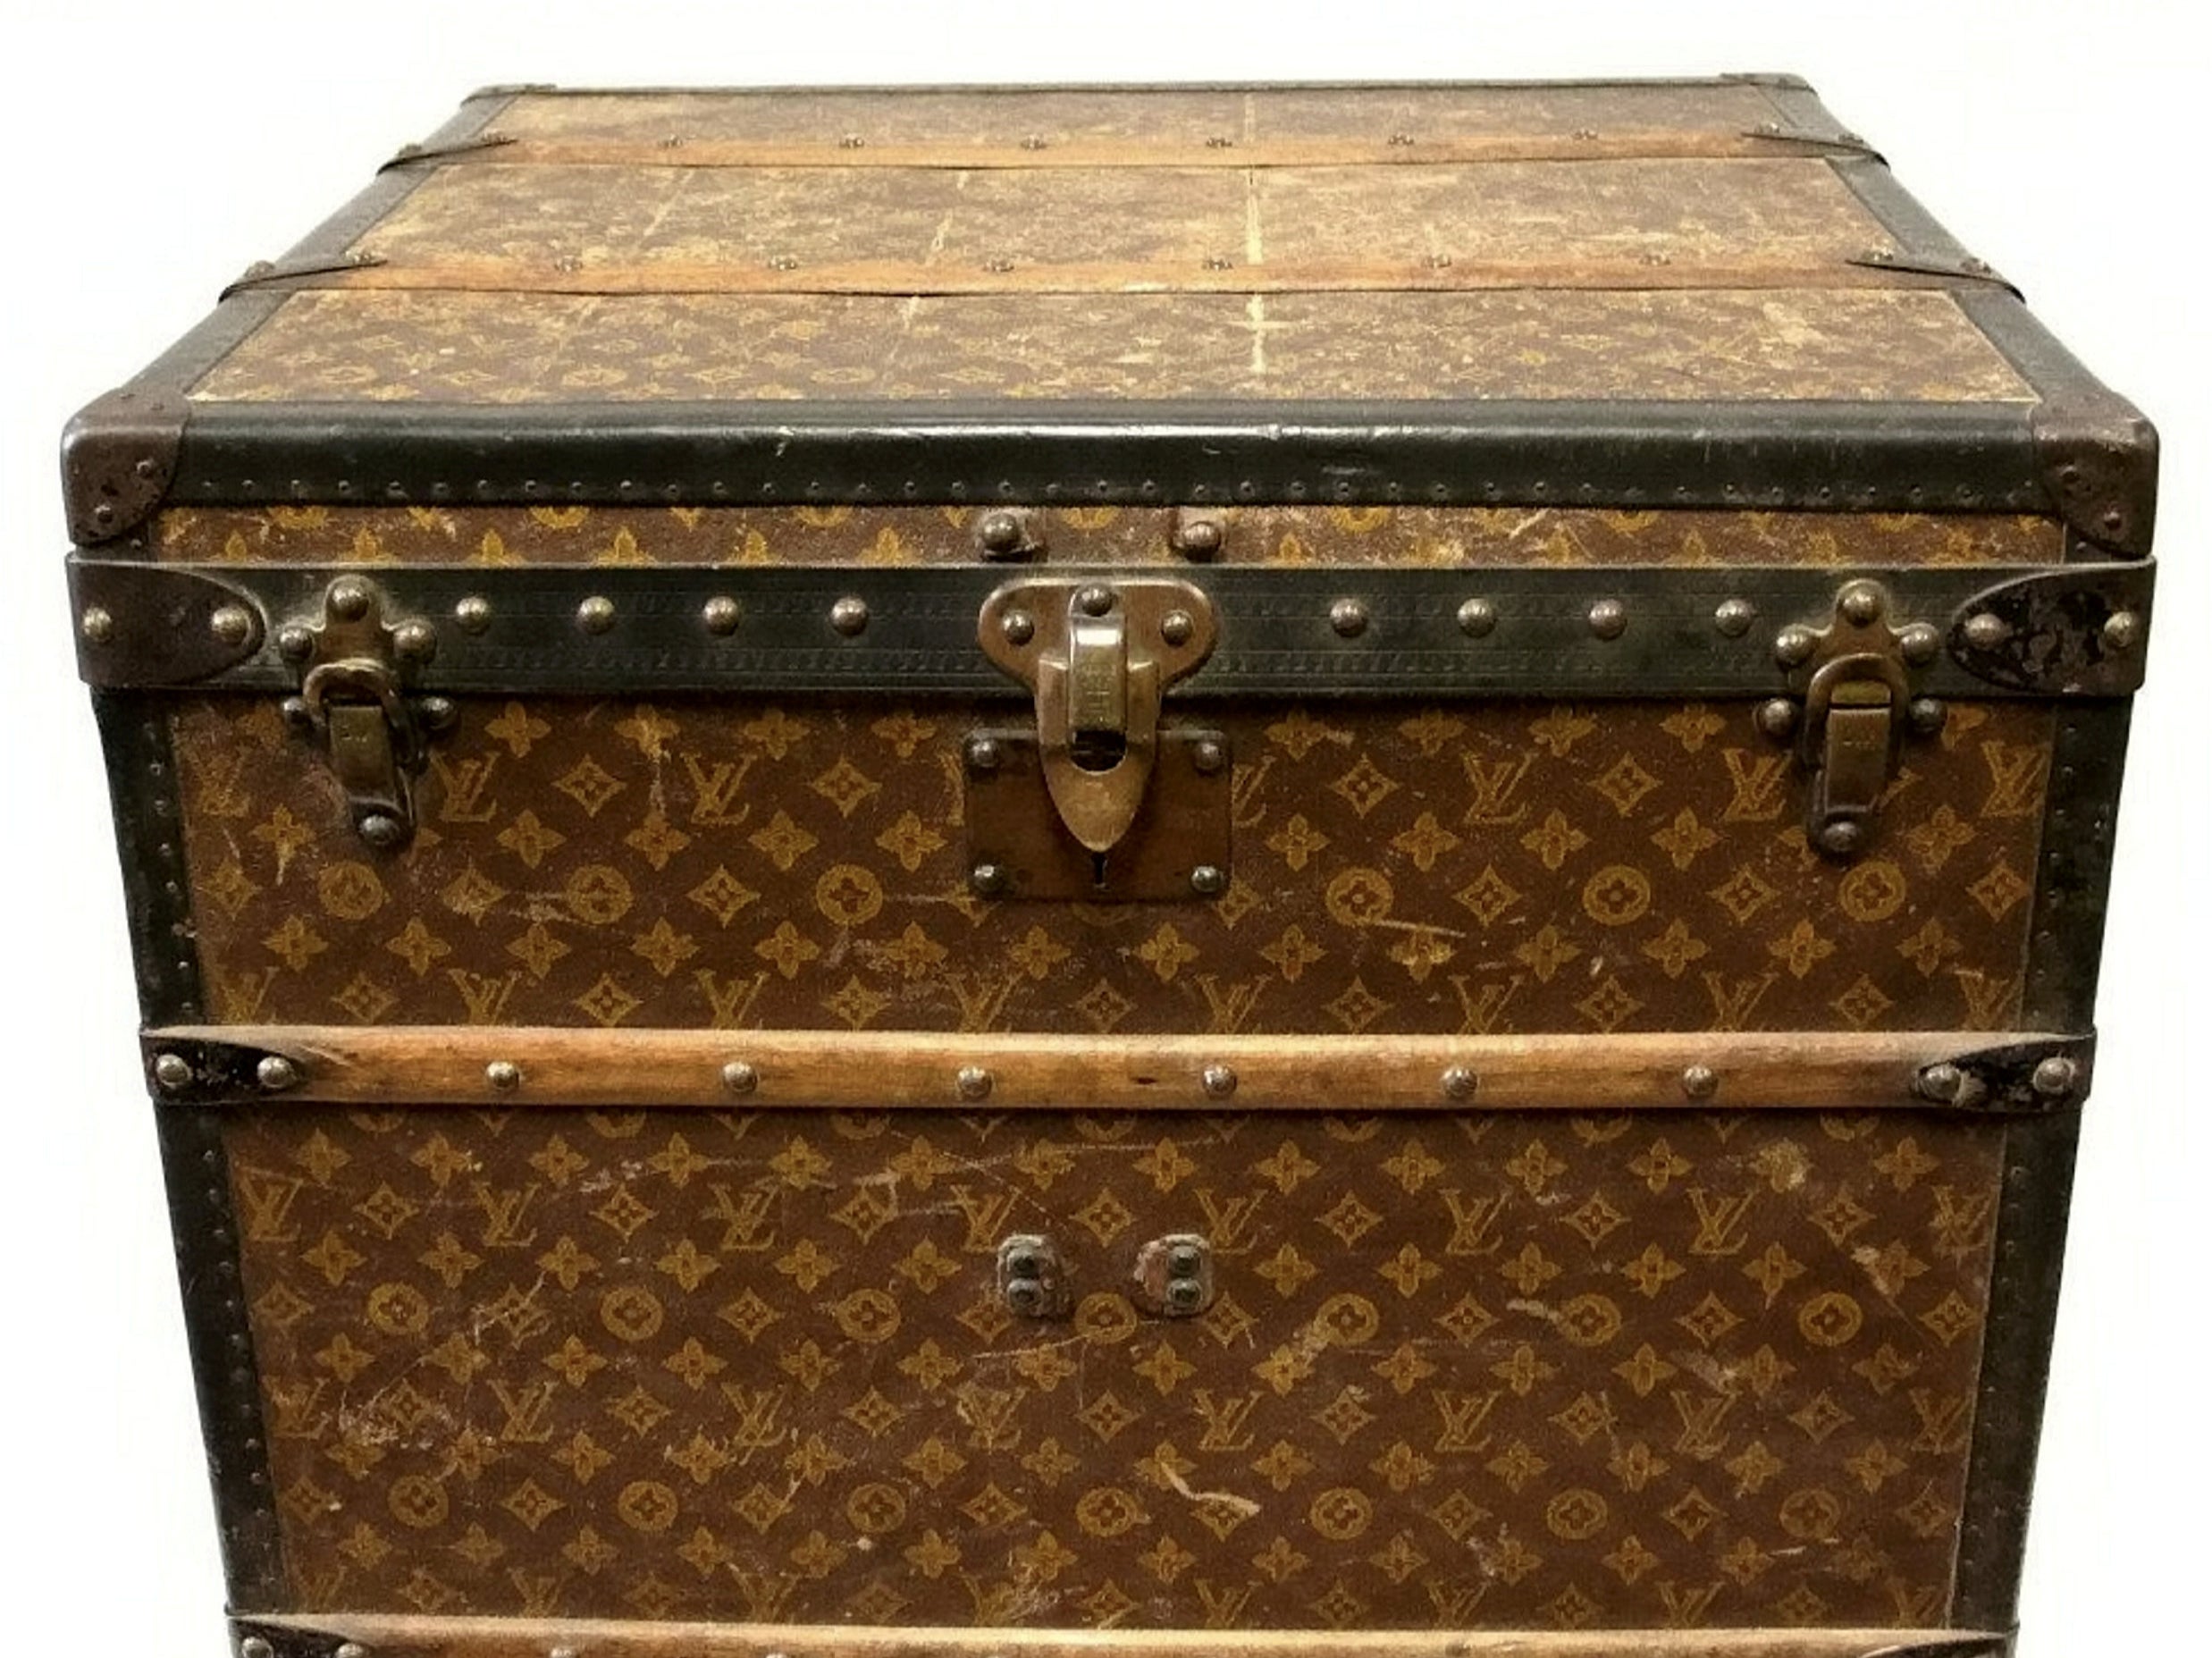 Louis Vuitton UK: £12 trunk nets thousands for owner in auction